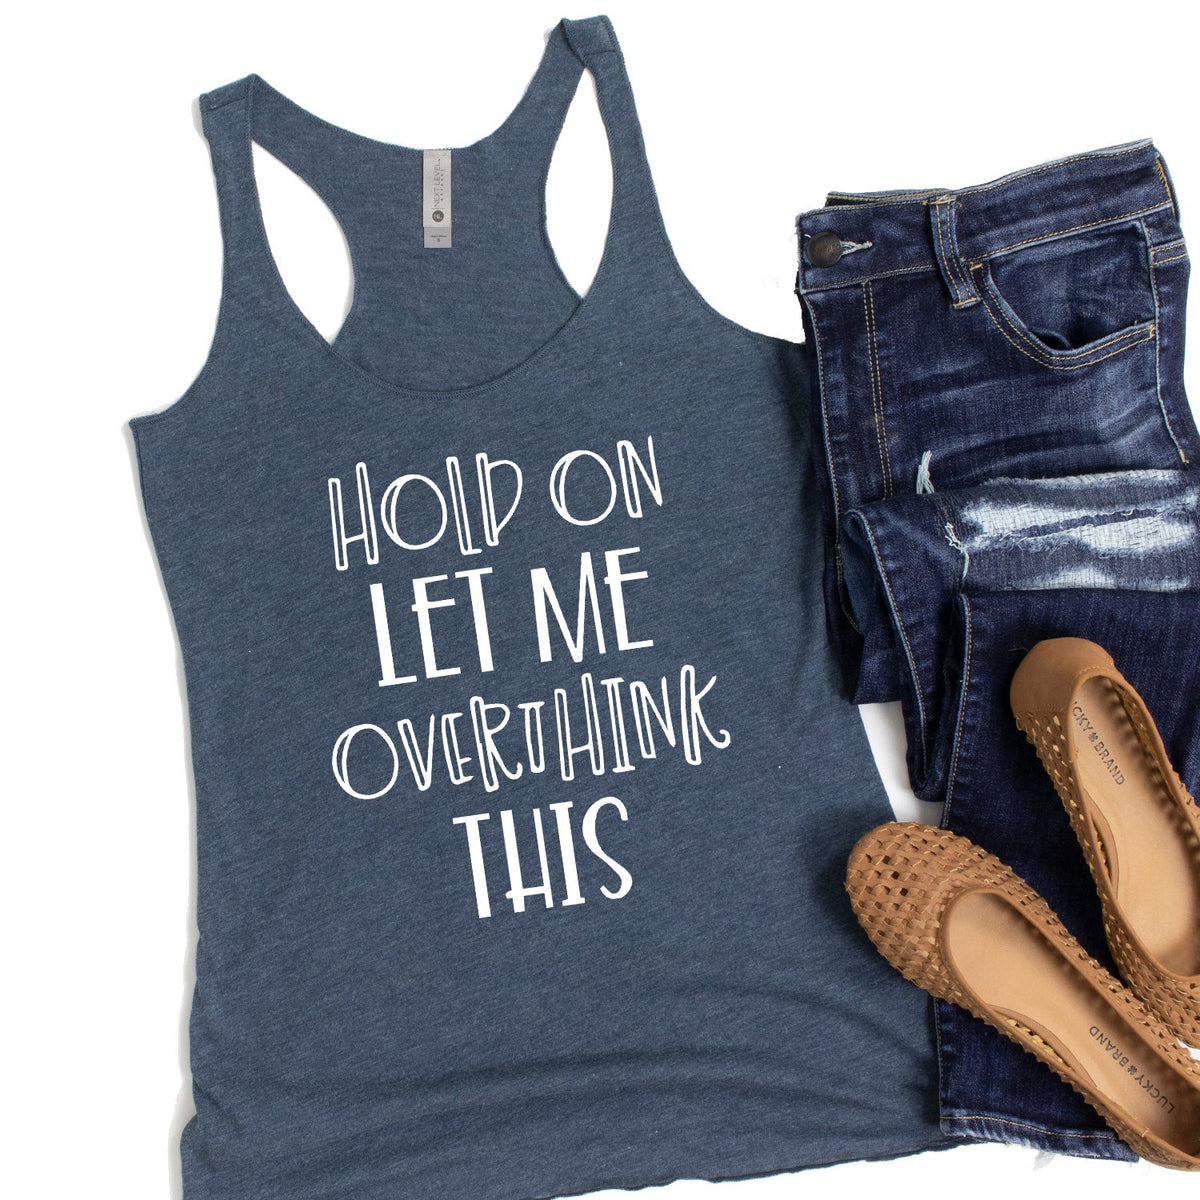 Hold On Let Me Overthink This - Tank Top Racerback